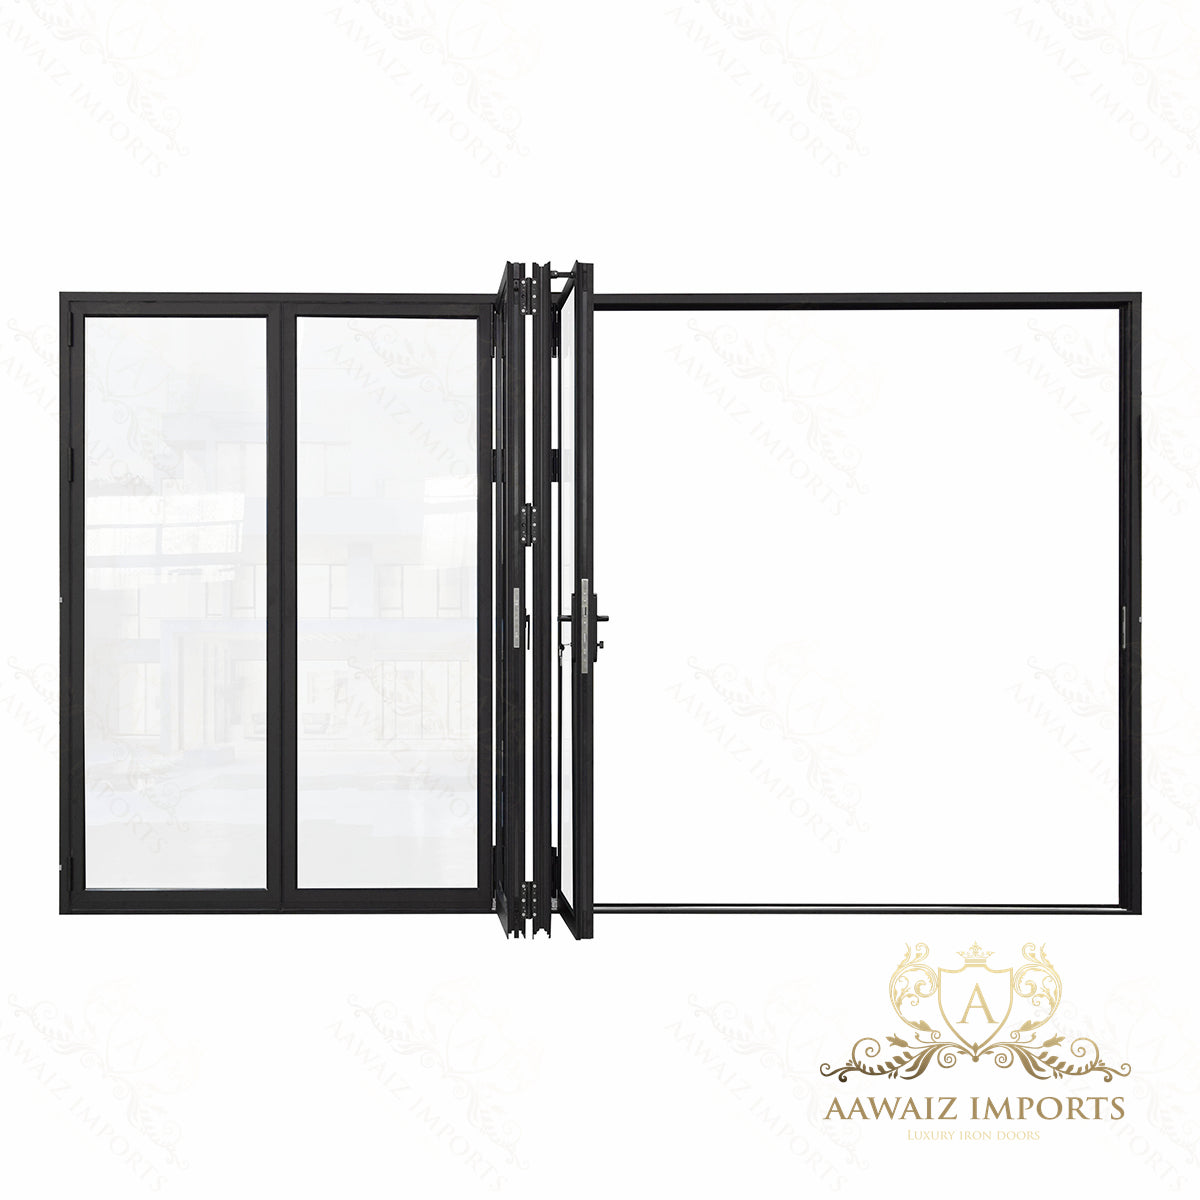 12 Ft Wide By 8 Ft Tall (144" By 96") Aluminum Bi Fold Patio Door  Outswing  Thermal Break Insulated Matt Black Finish